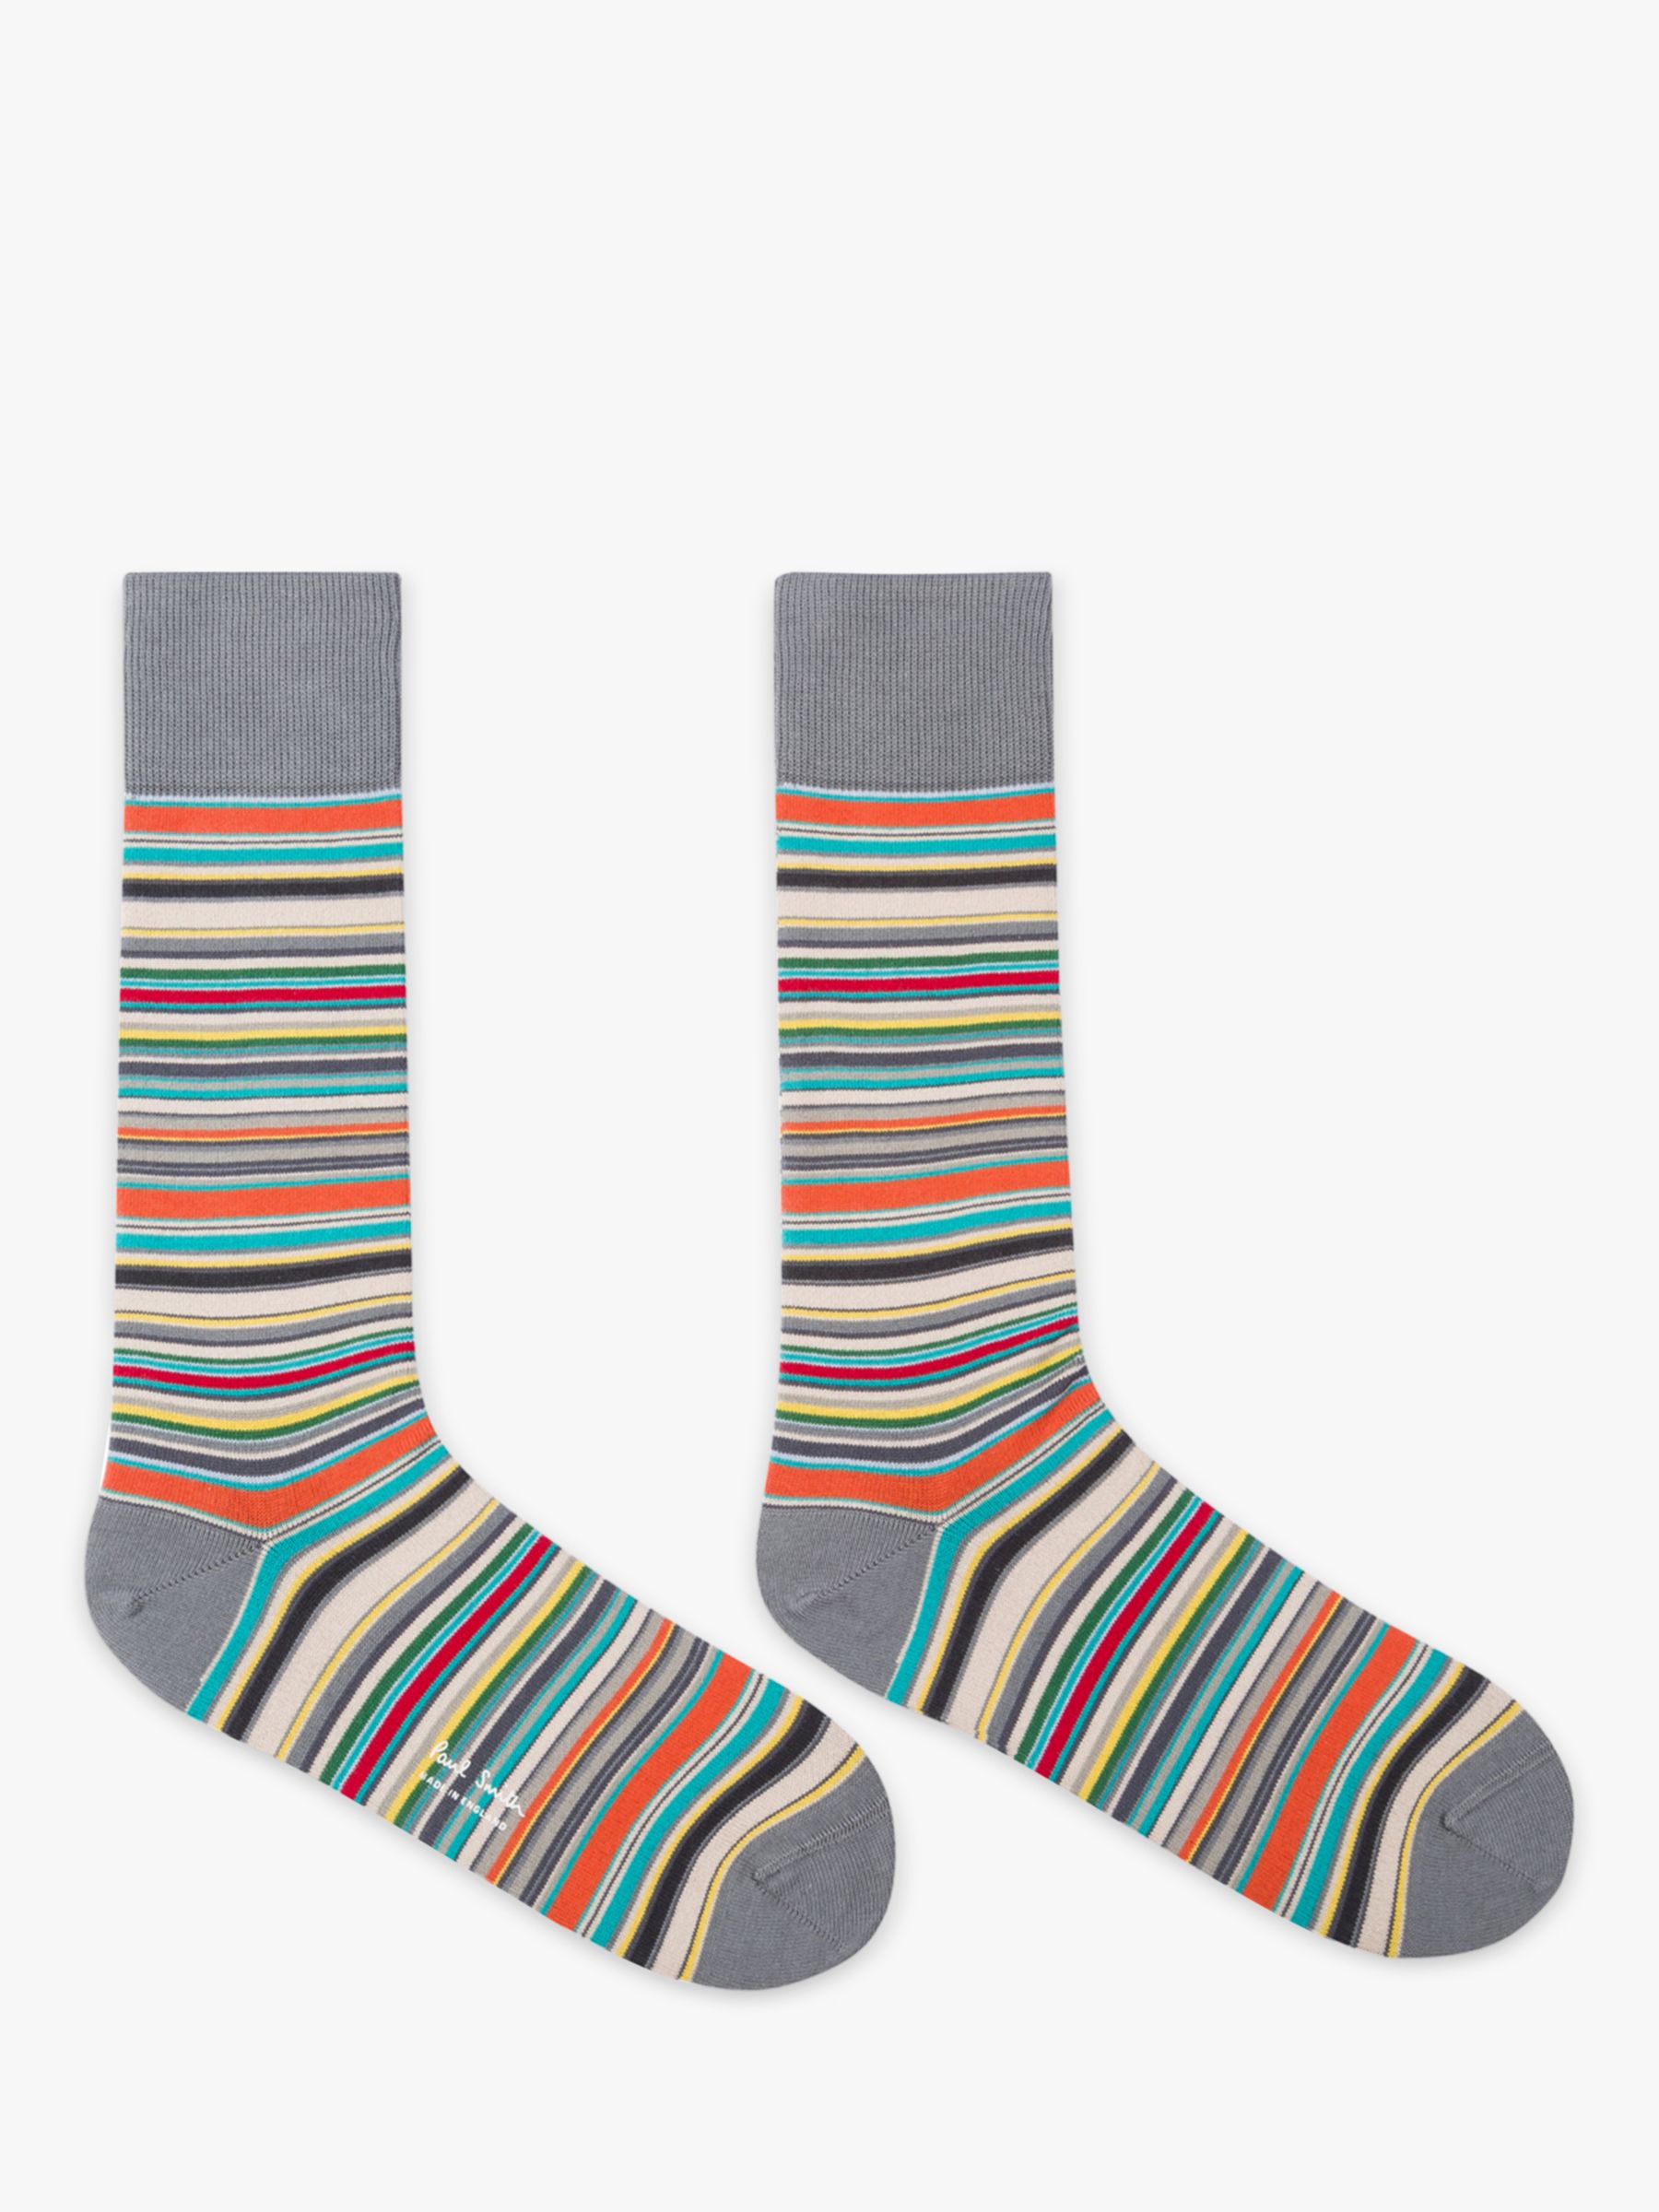 Buy Paul Smith Signature Stripe Socks, Pack of 3, One Size, Multi Online at johnlewis.com